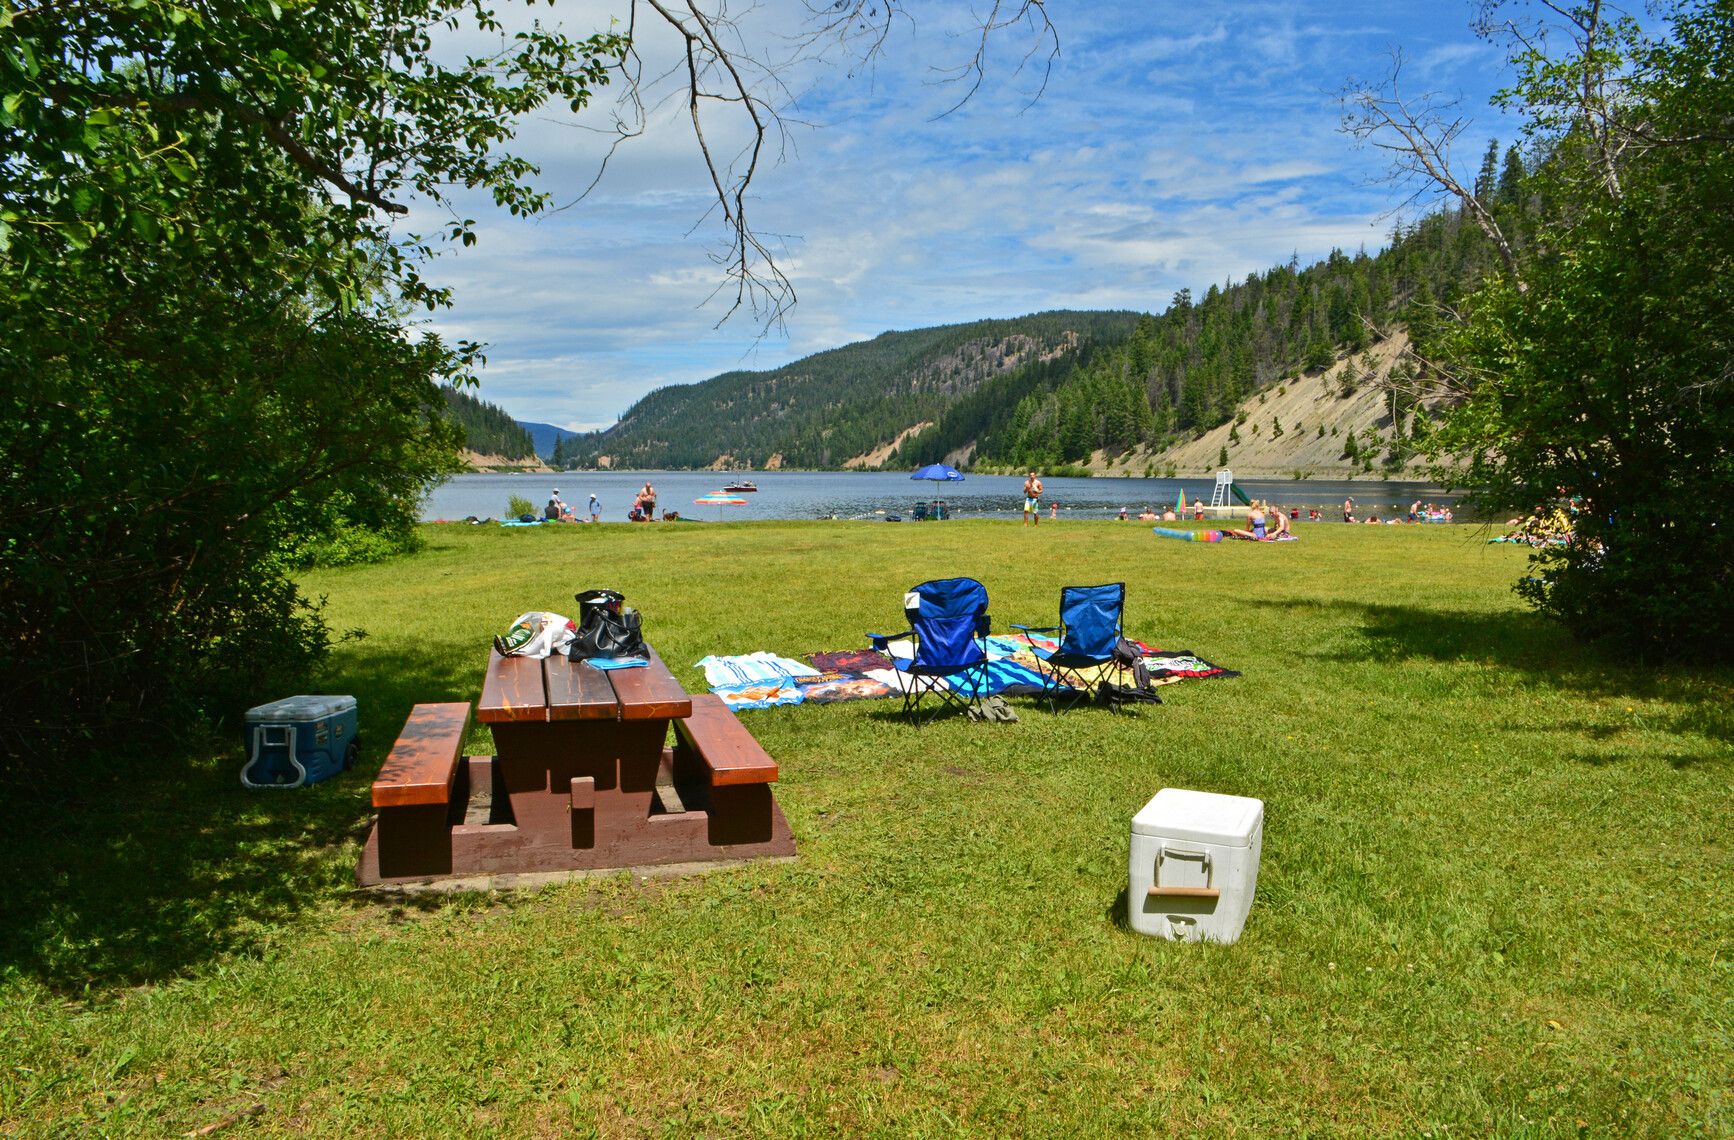 Day-use area in Otter Lake Park provides a perfect space to picnic by the lake.